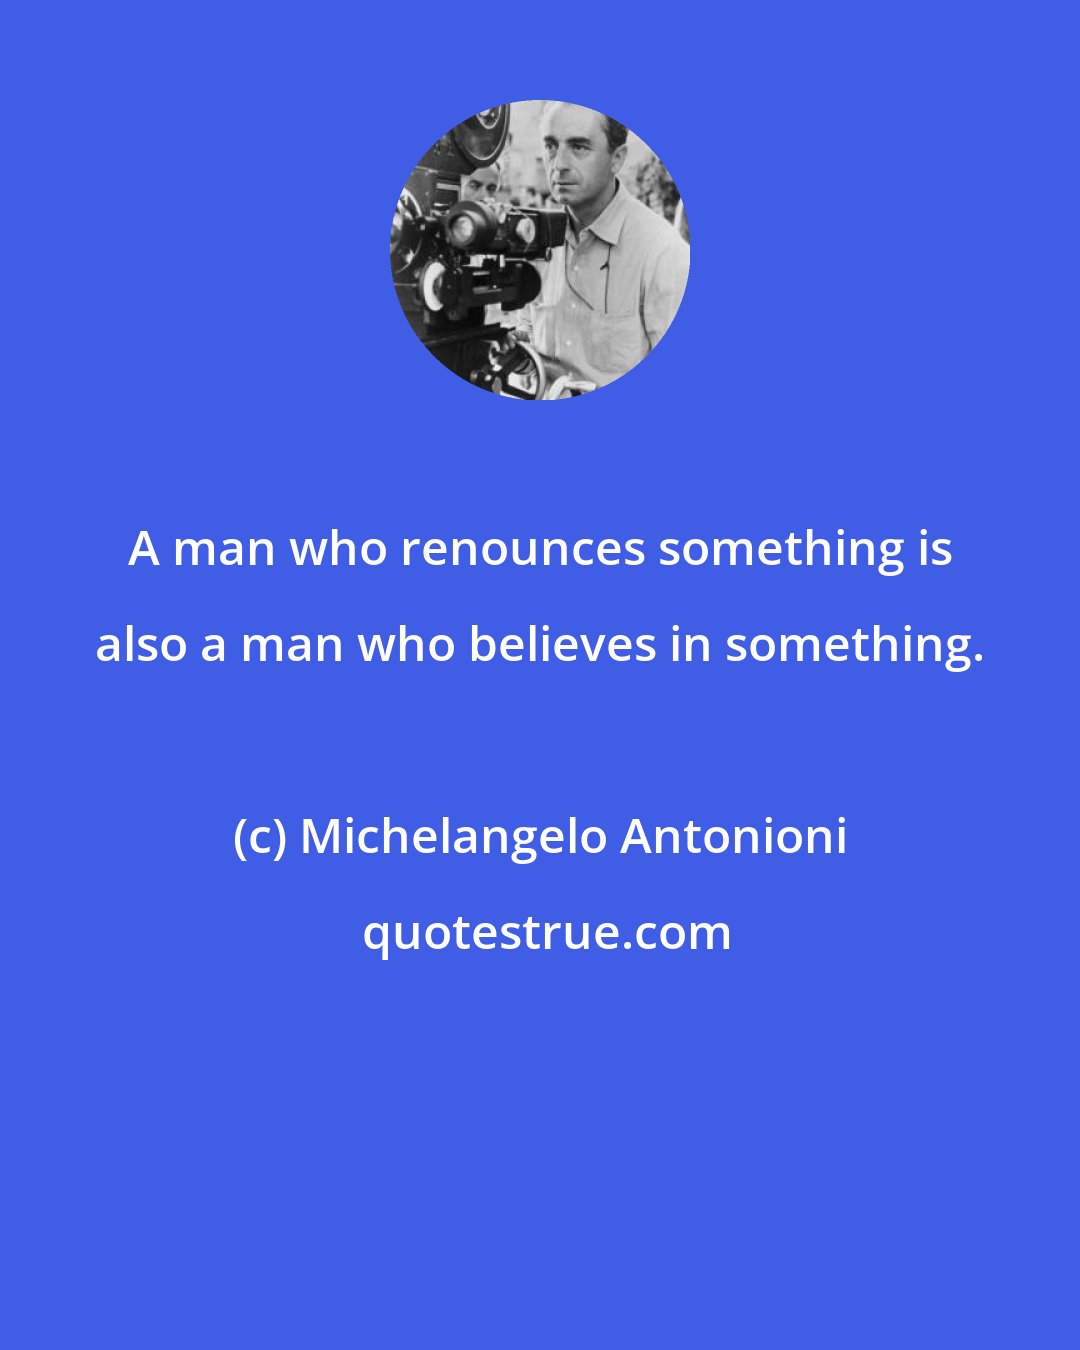 Michelangelo Antonioni: A man who renounces something is also a man who believes in something.